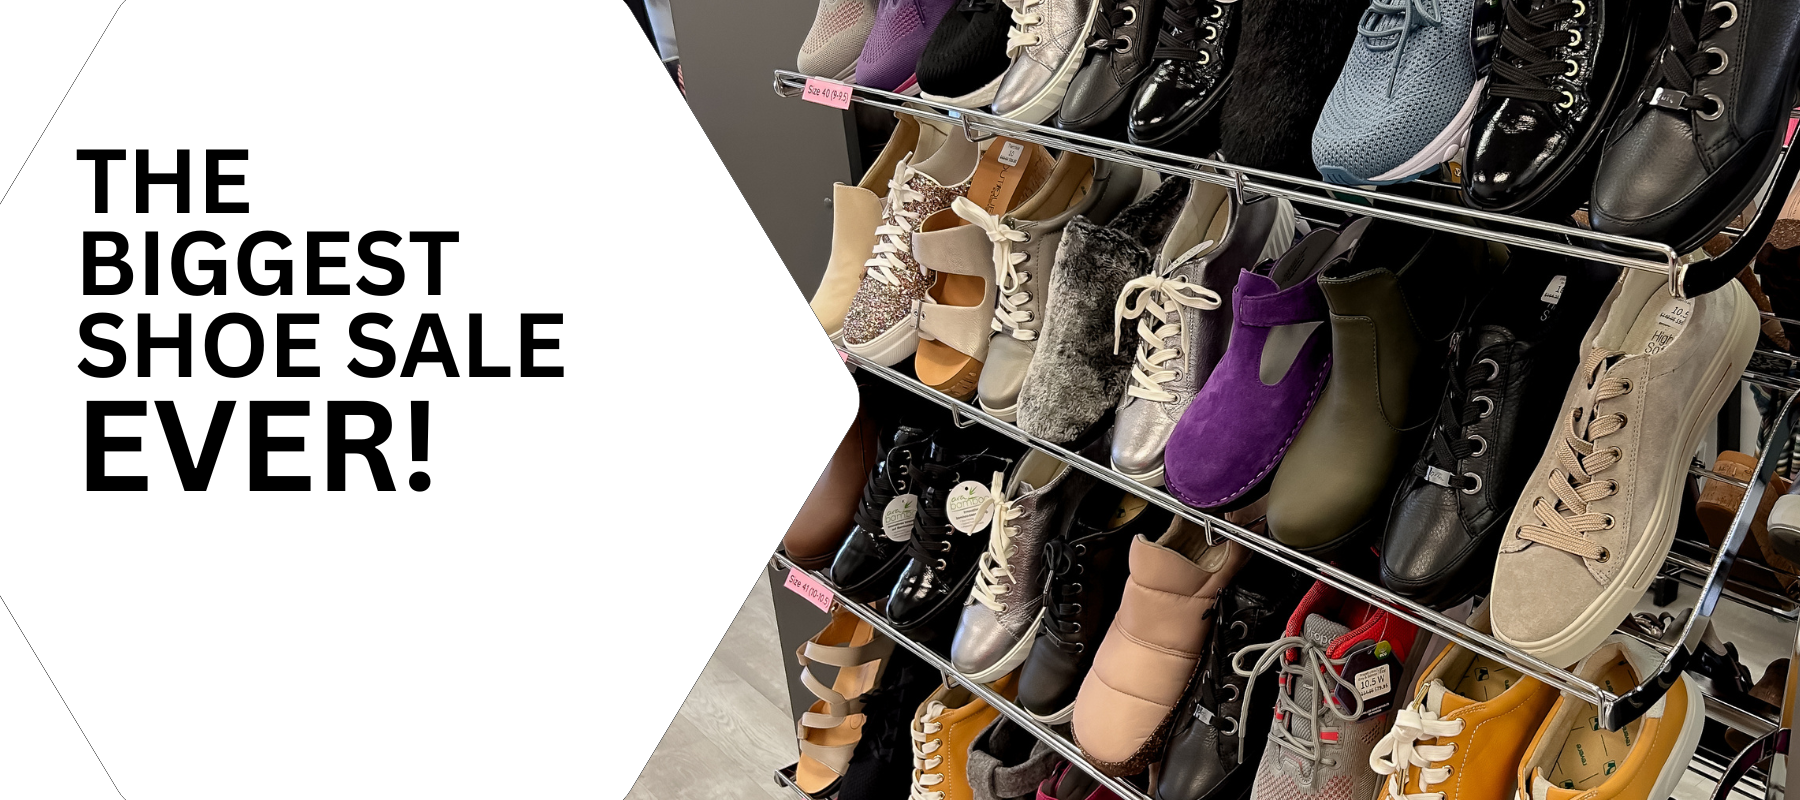 The Biggest Shoe Sale Ever. Shop Now for 60% off quality footwear.